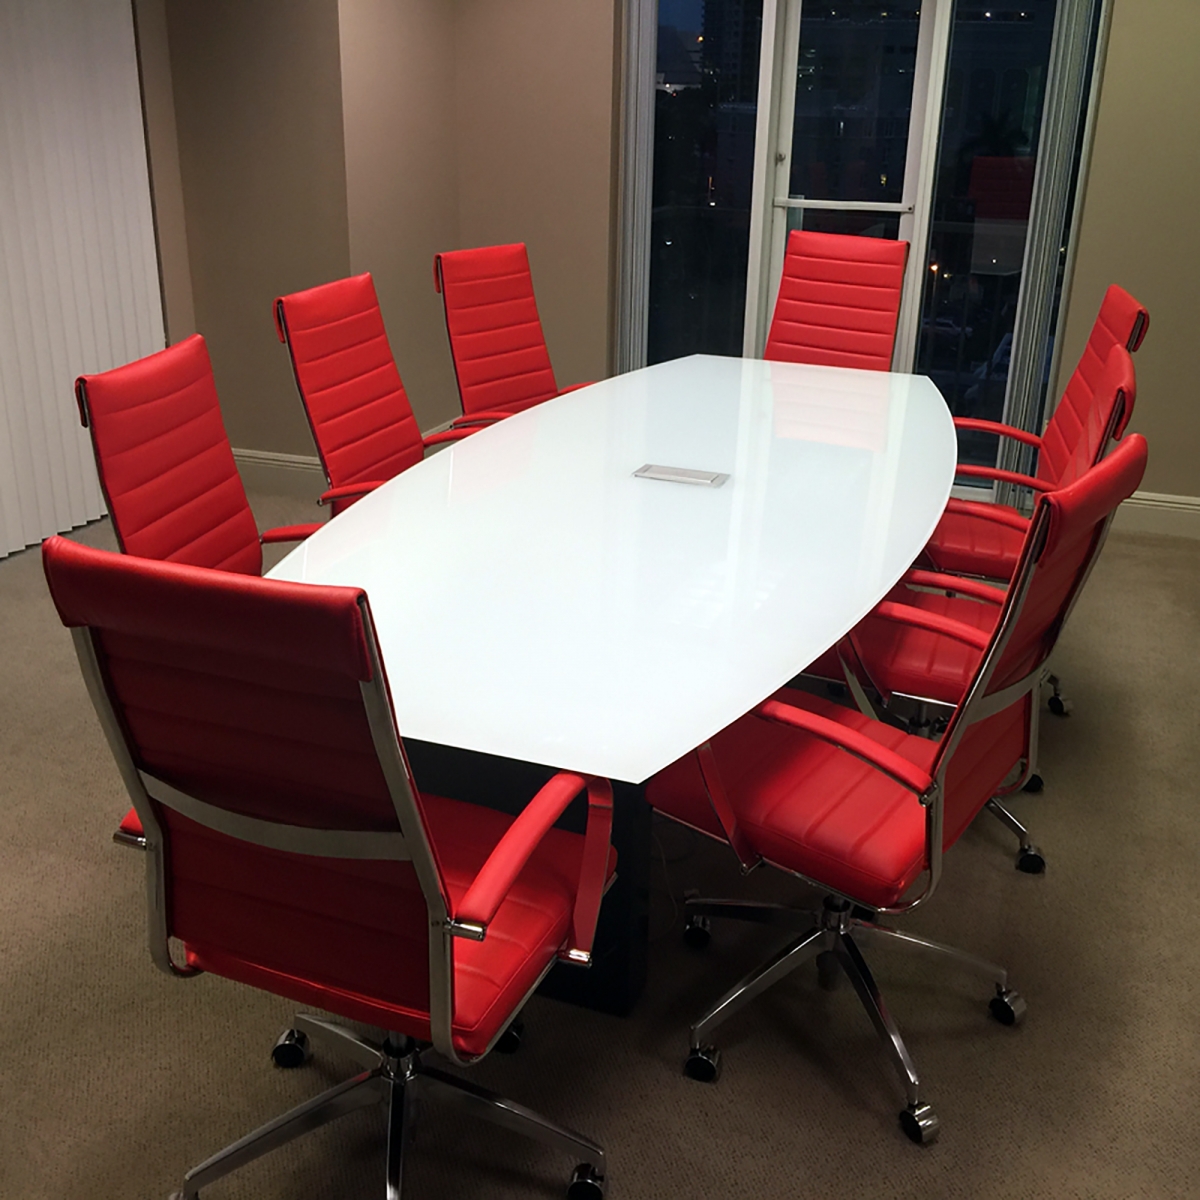 Axis Boat Shape Glass Meeting Table 